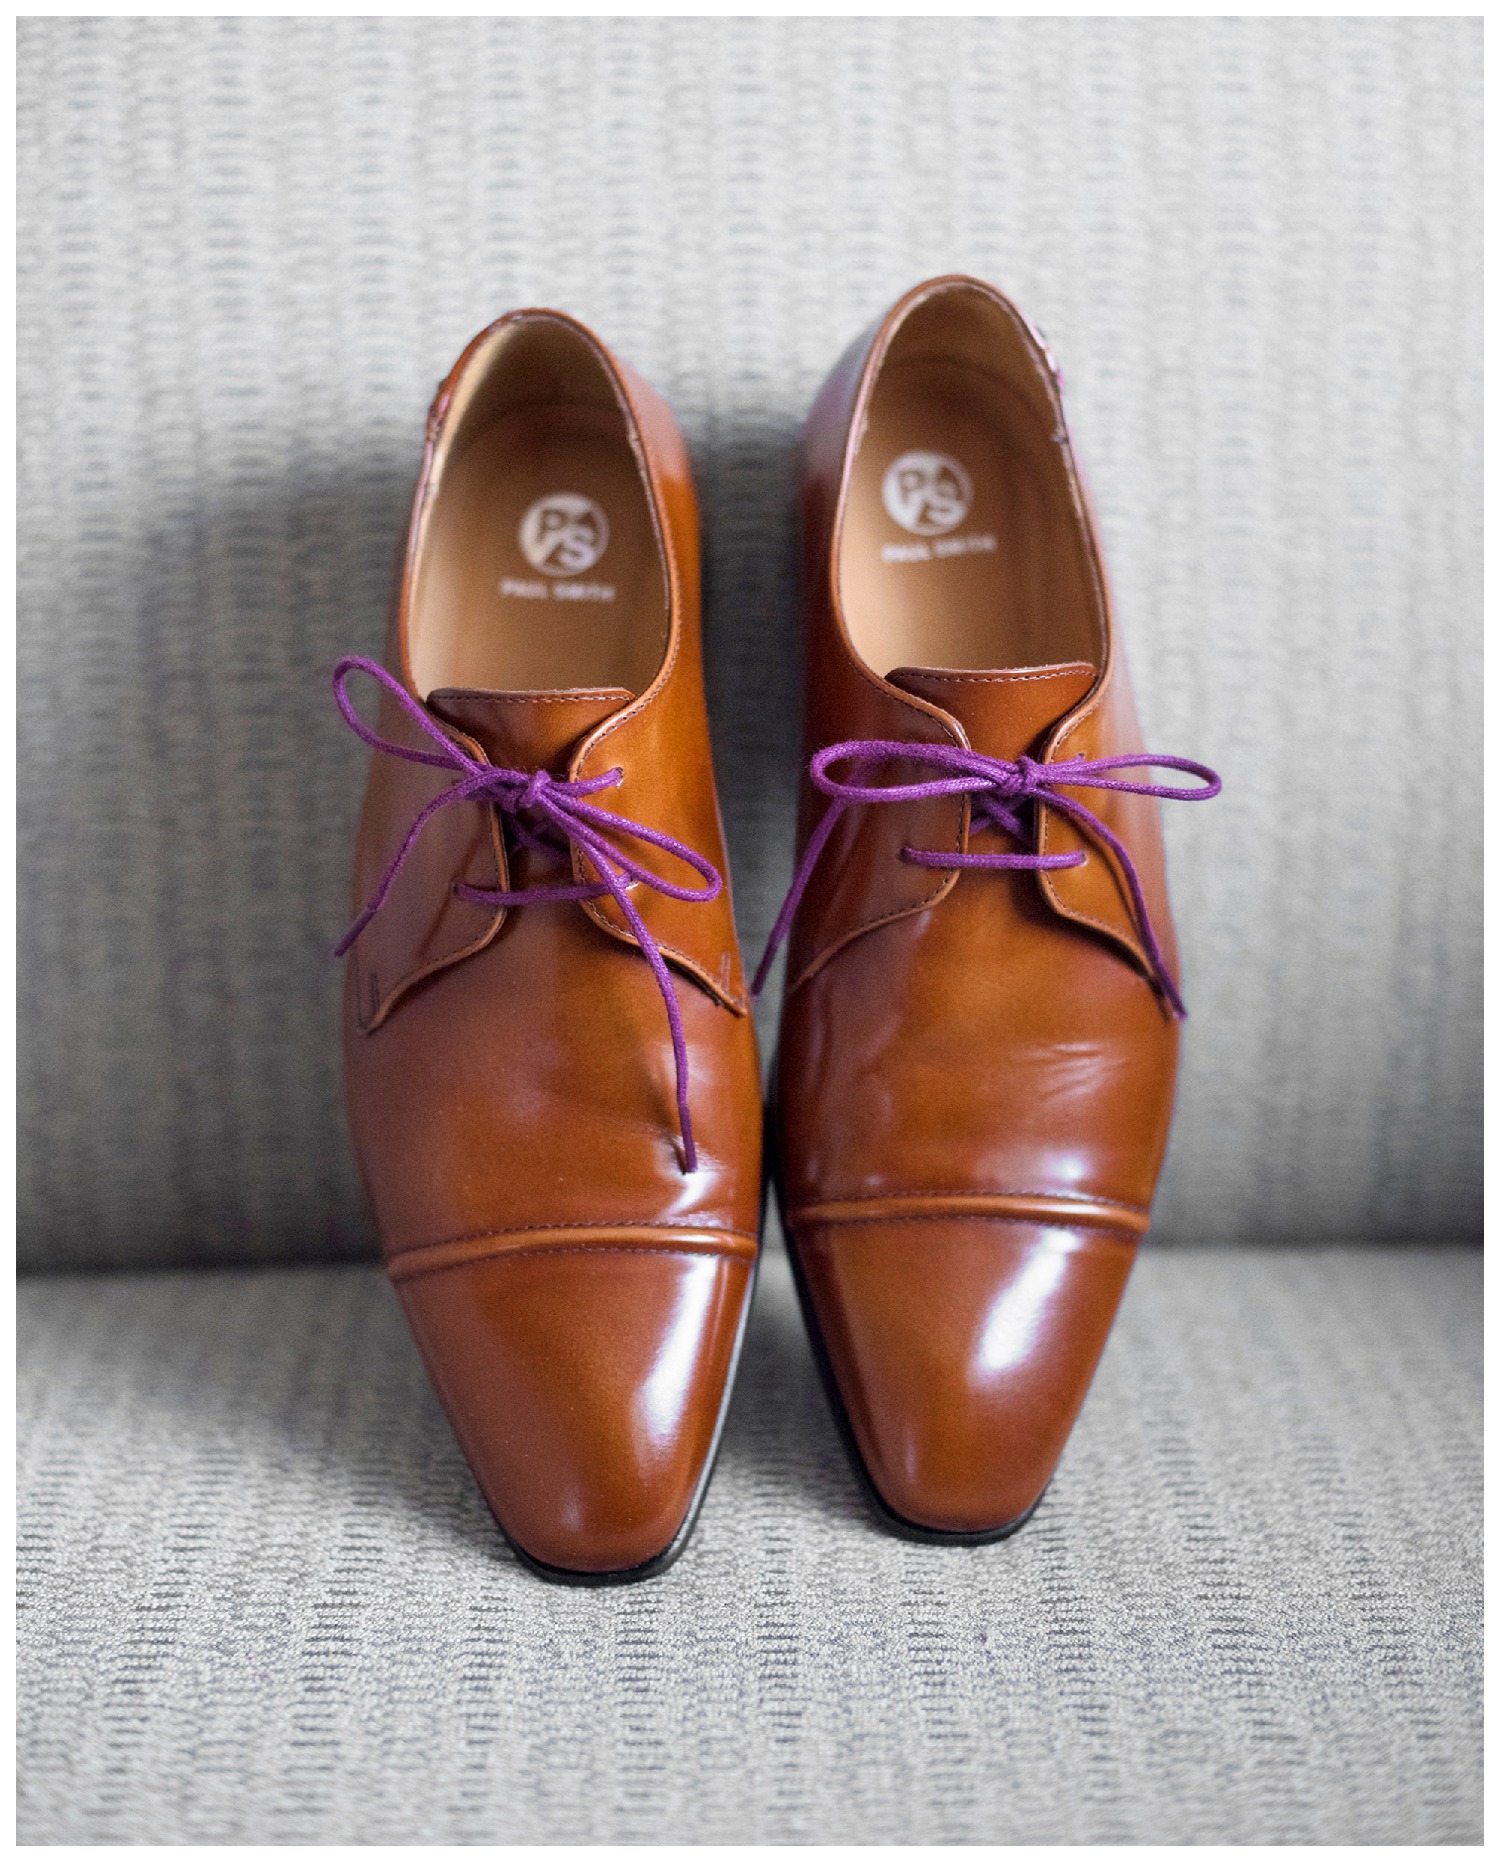 how to tie shoelaces mens wedding shoes laces